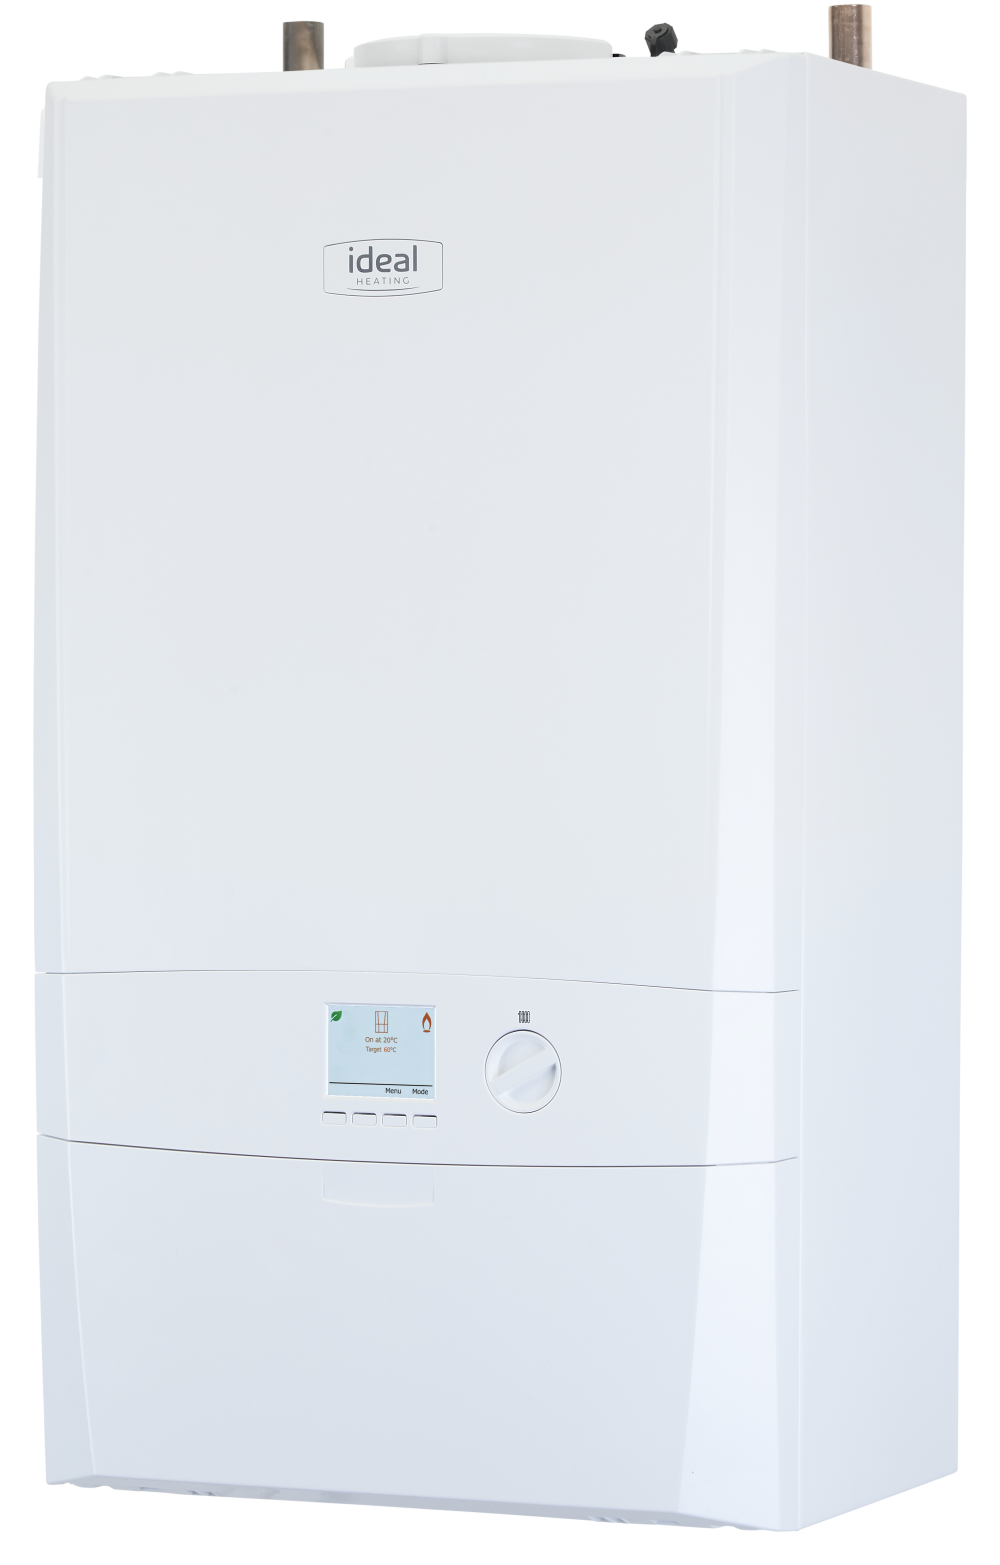 Ideal Logic Max Heat Boilers featured image